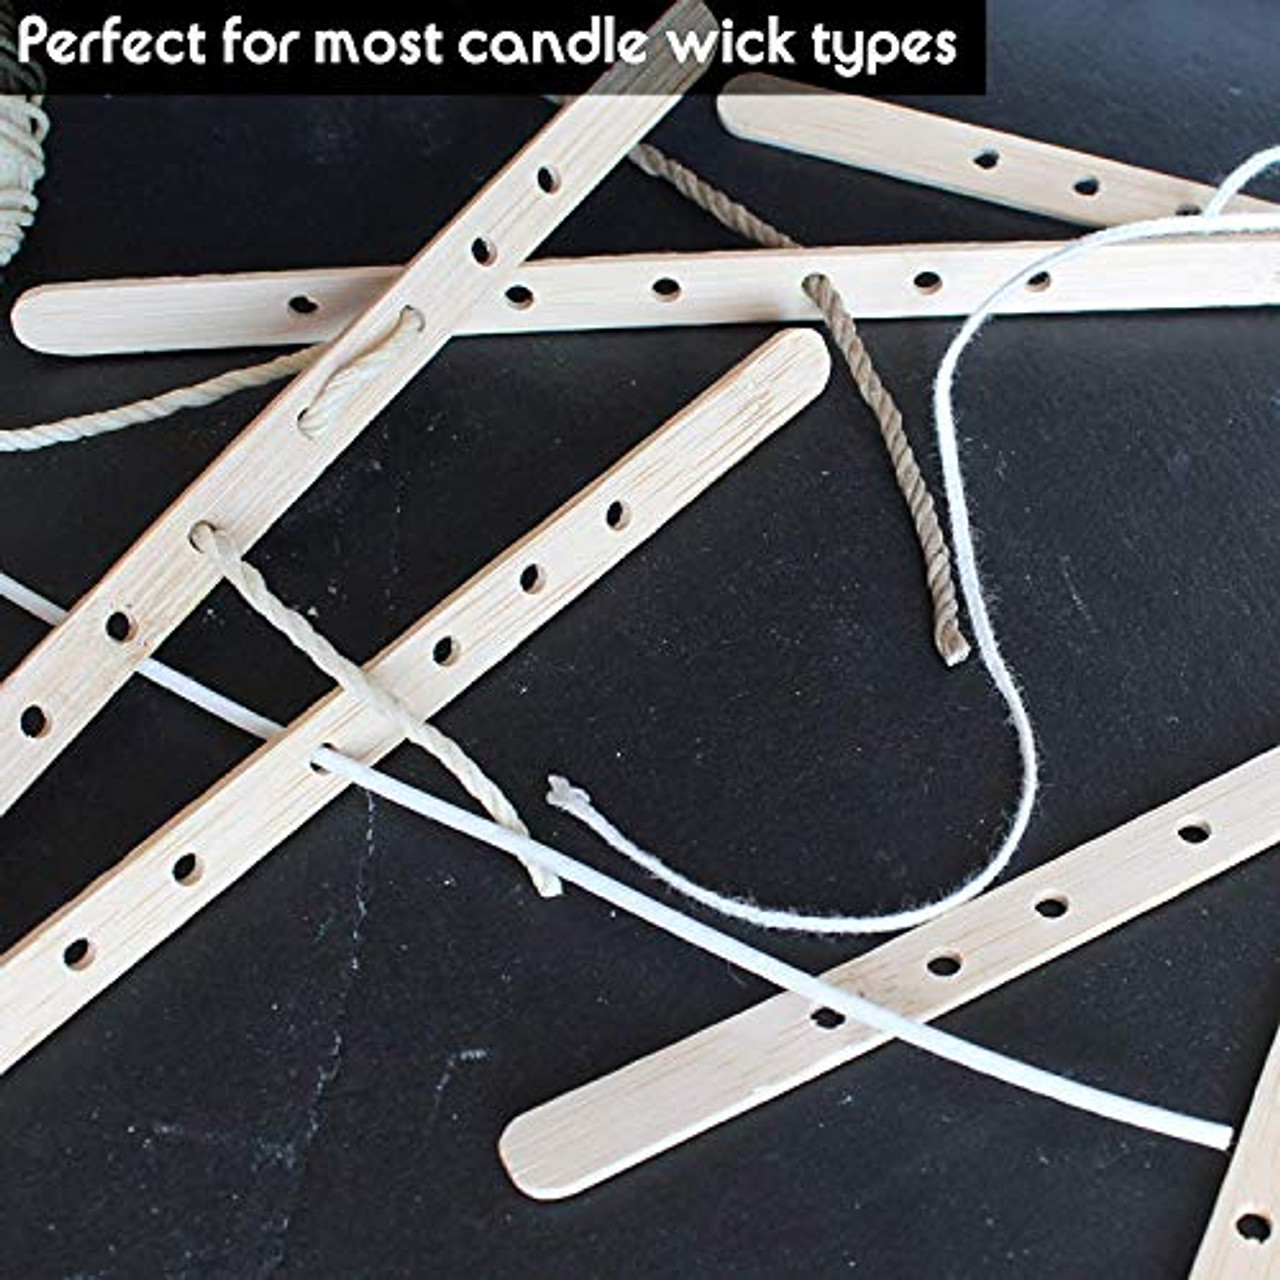 10pcs Metal Candle Wick Holders, Upgraded Candle Wick Centering Devices,  Silver Stainless Steel Candle Wick Holder for Candle Making